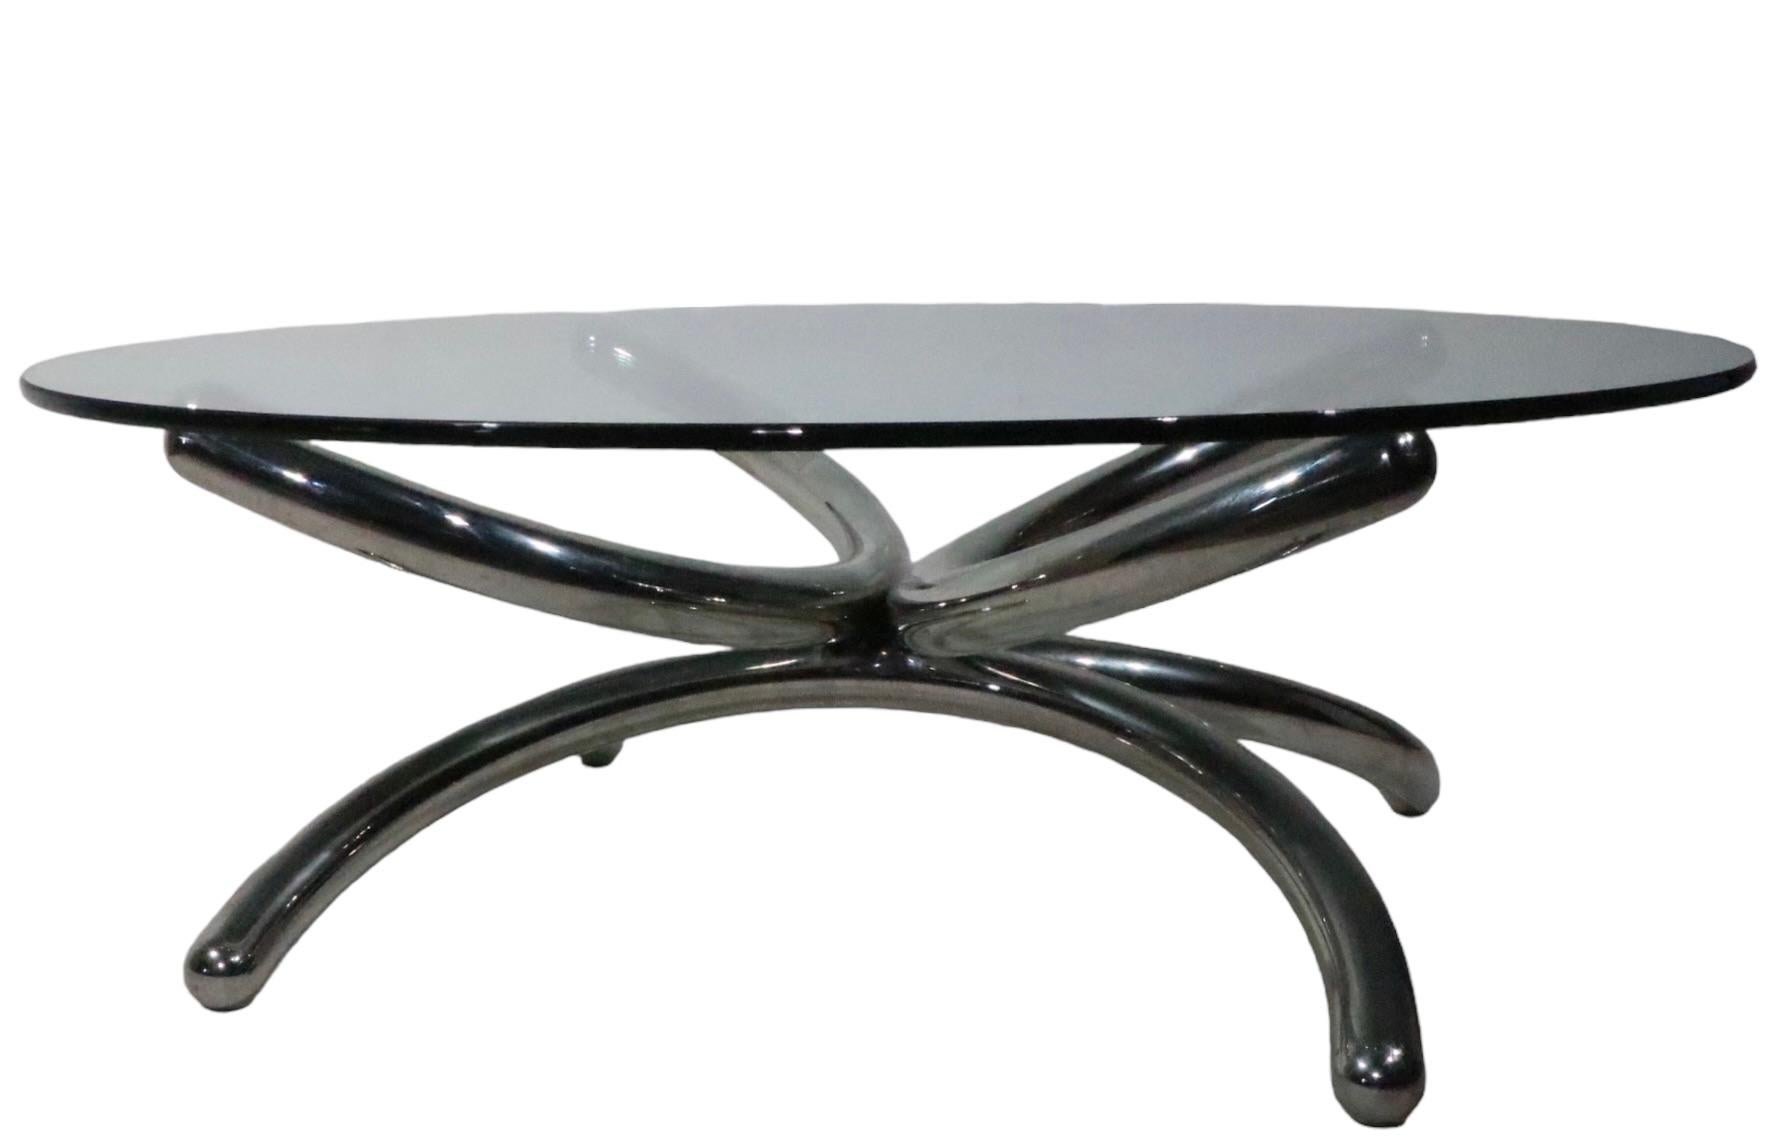 American  Round Chrome and Glass Coffee Cocktail Table c 1960/70s possibly Paul Tuttle  For Sale